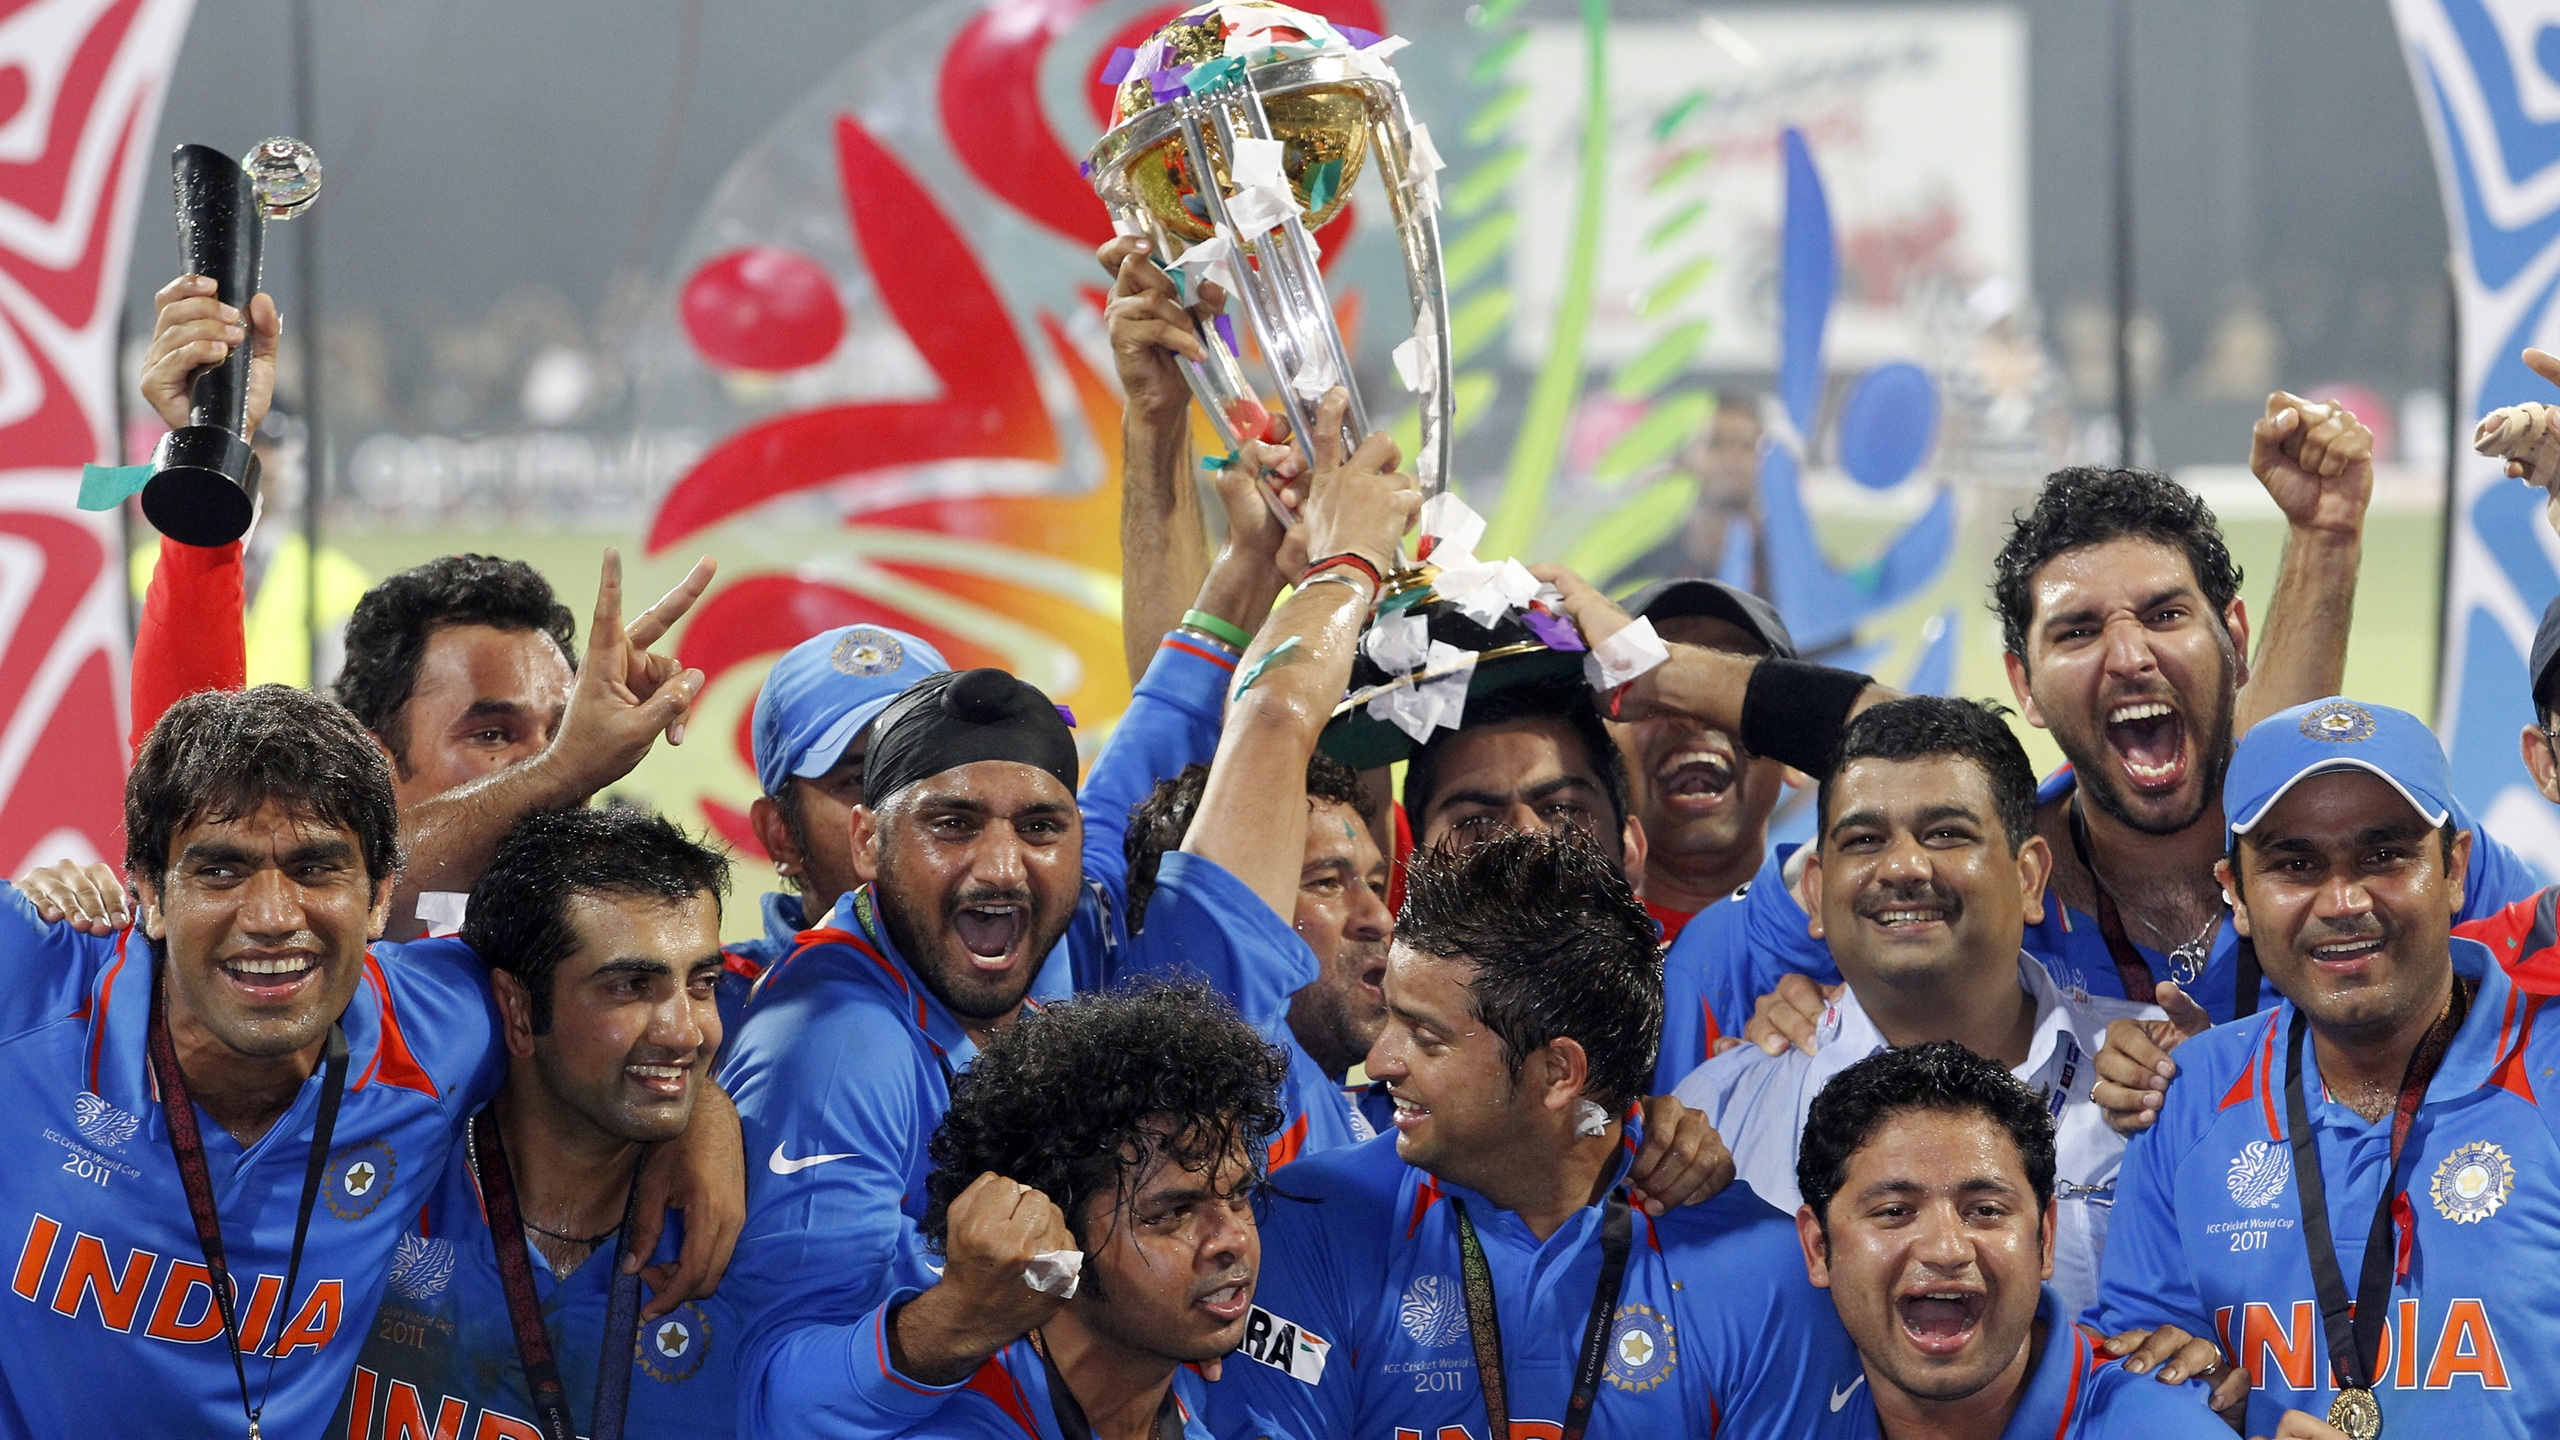 Cricket India Team for 2560x1440 HDTV resolution